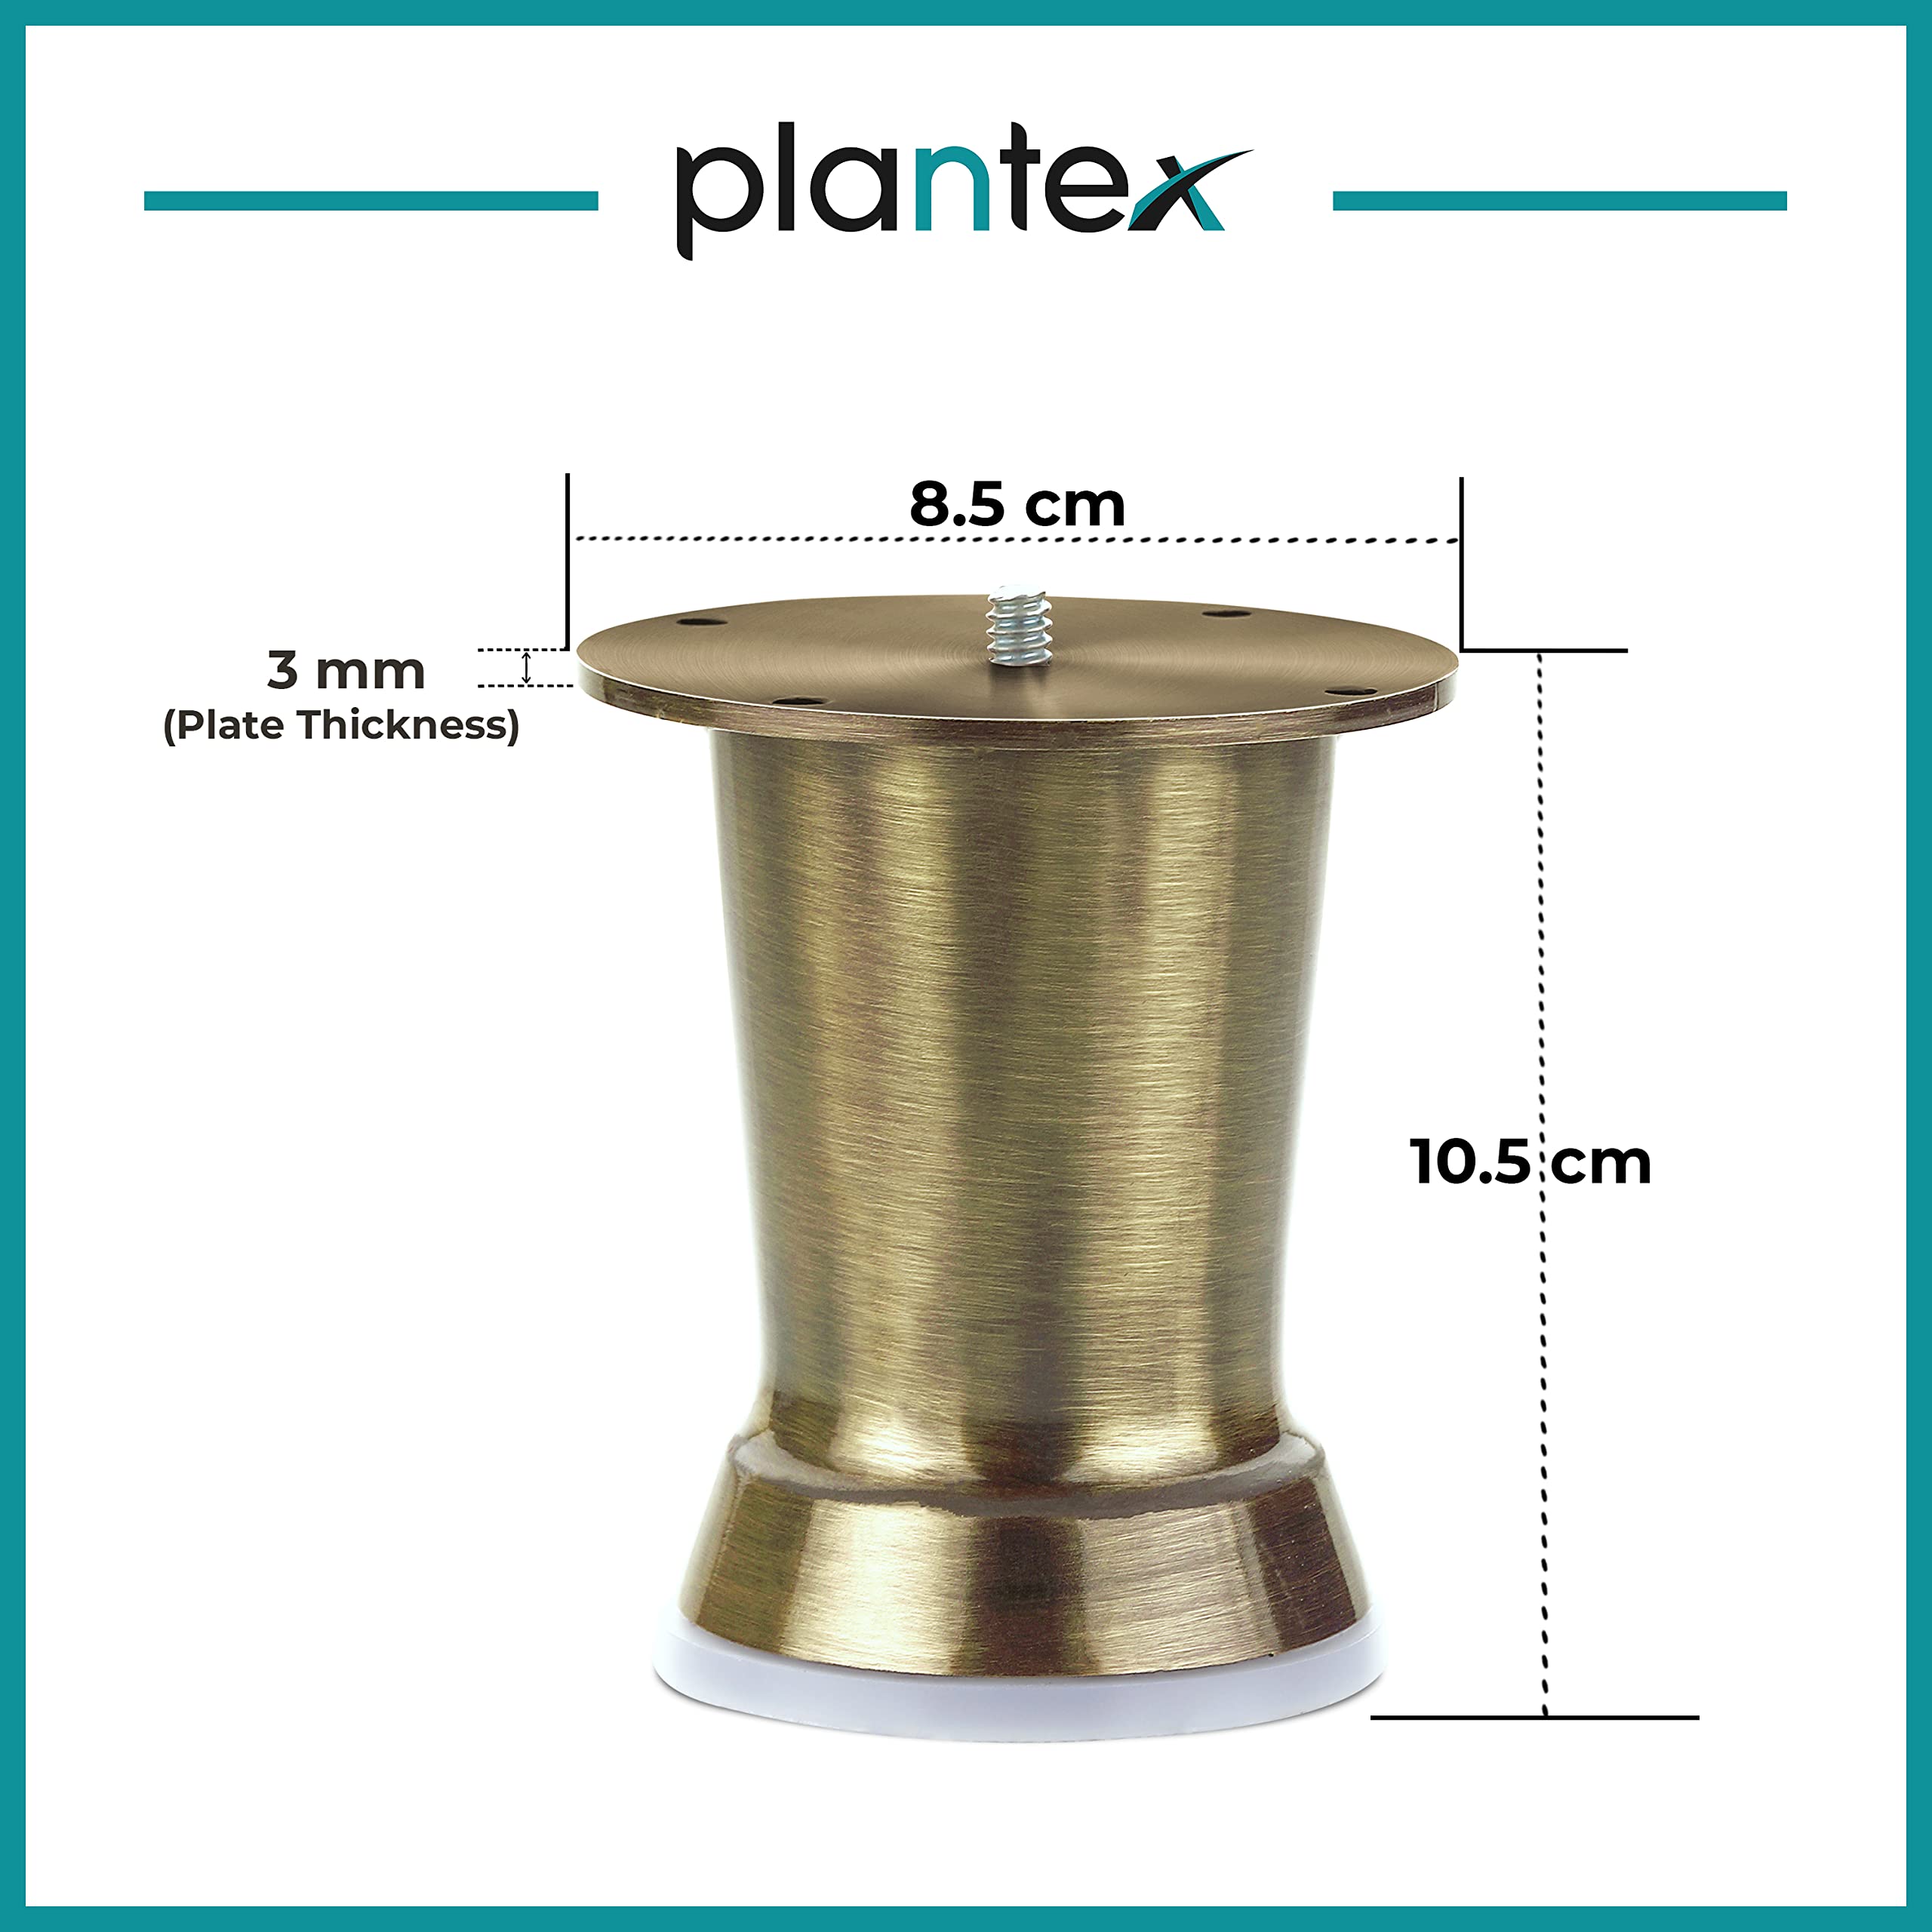 Plantex Heavy Duty Stainless Steel 4 inch Sofa Leg/Bed Furniture Leg Pair for Home Furnitures (DTS-51, Brass Antique) – 2 Pcs